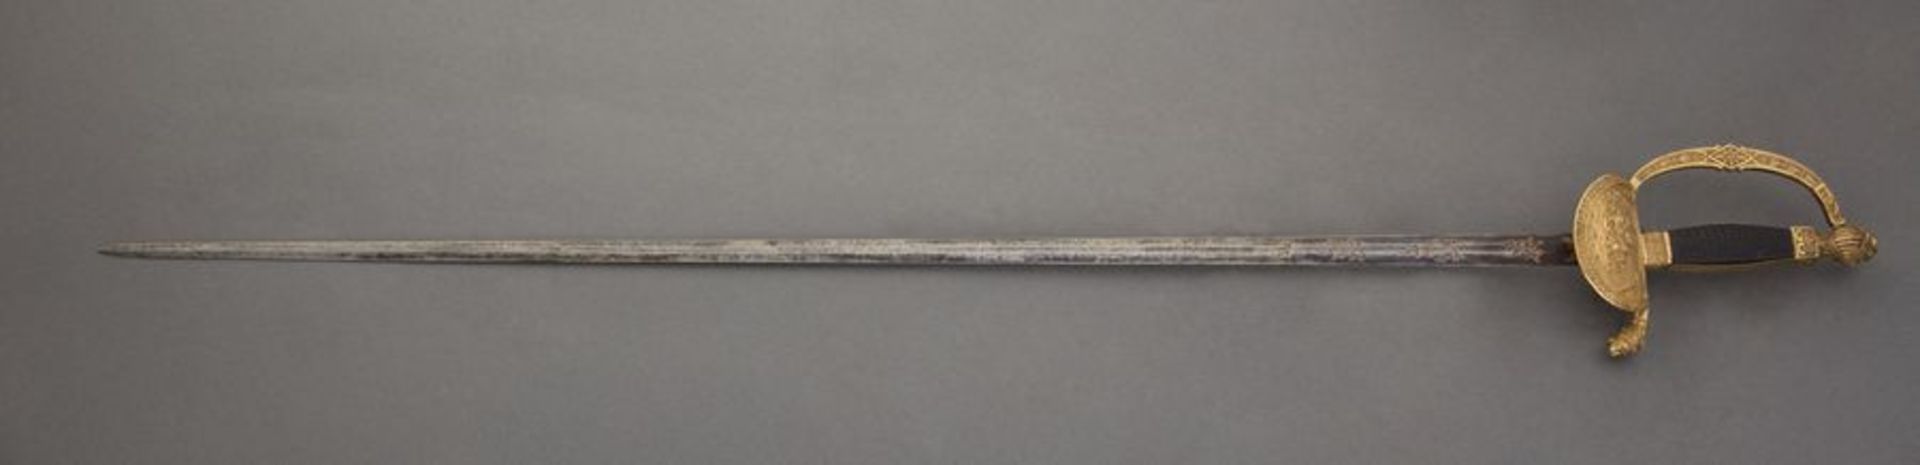 French of cer’s sword from the period of the 1st Empire (1804-1815), without a [...]